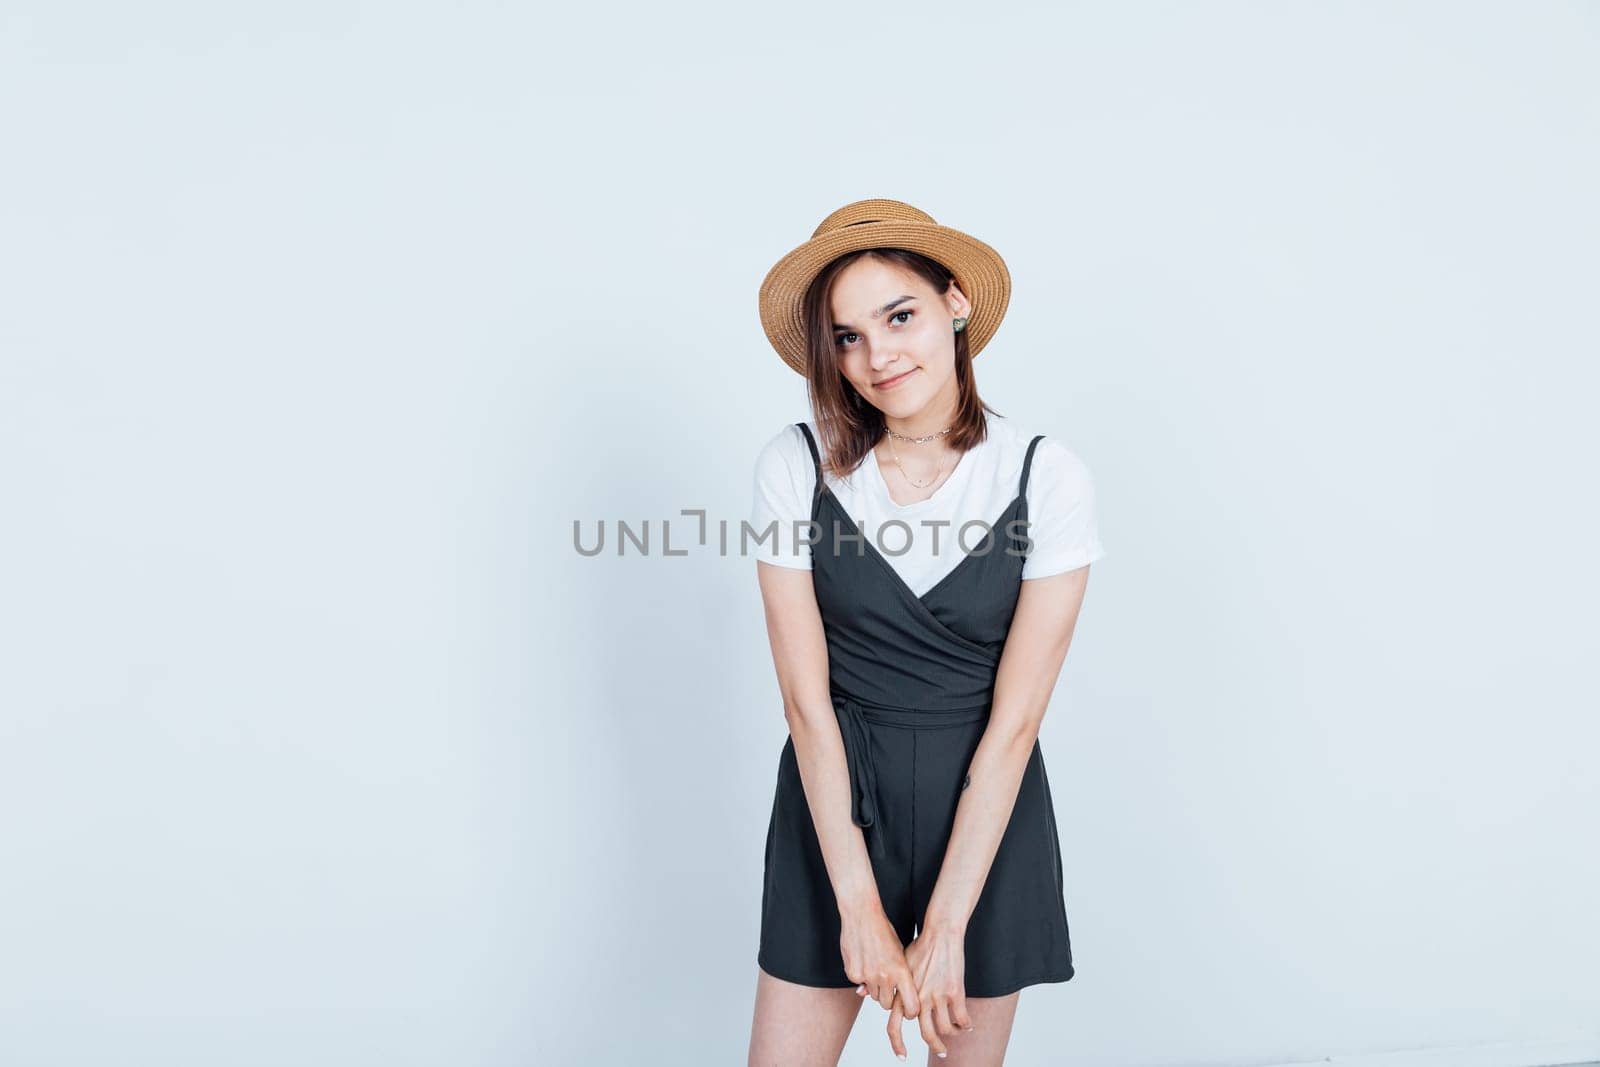 Portrait of a beautiful woman in a black dress and hat